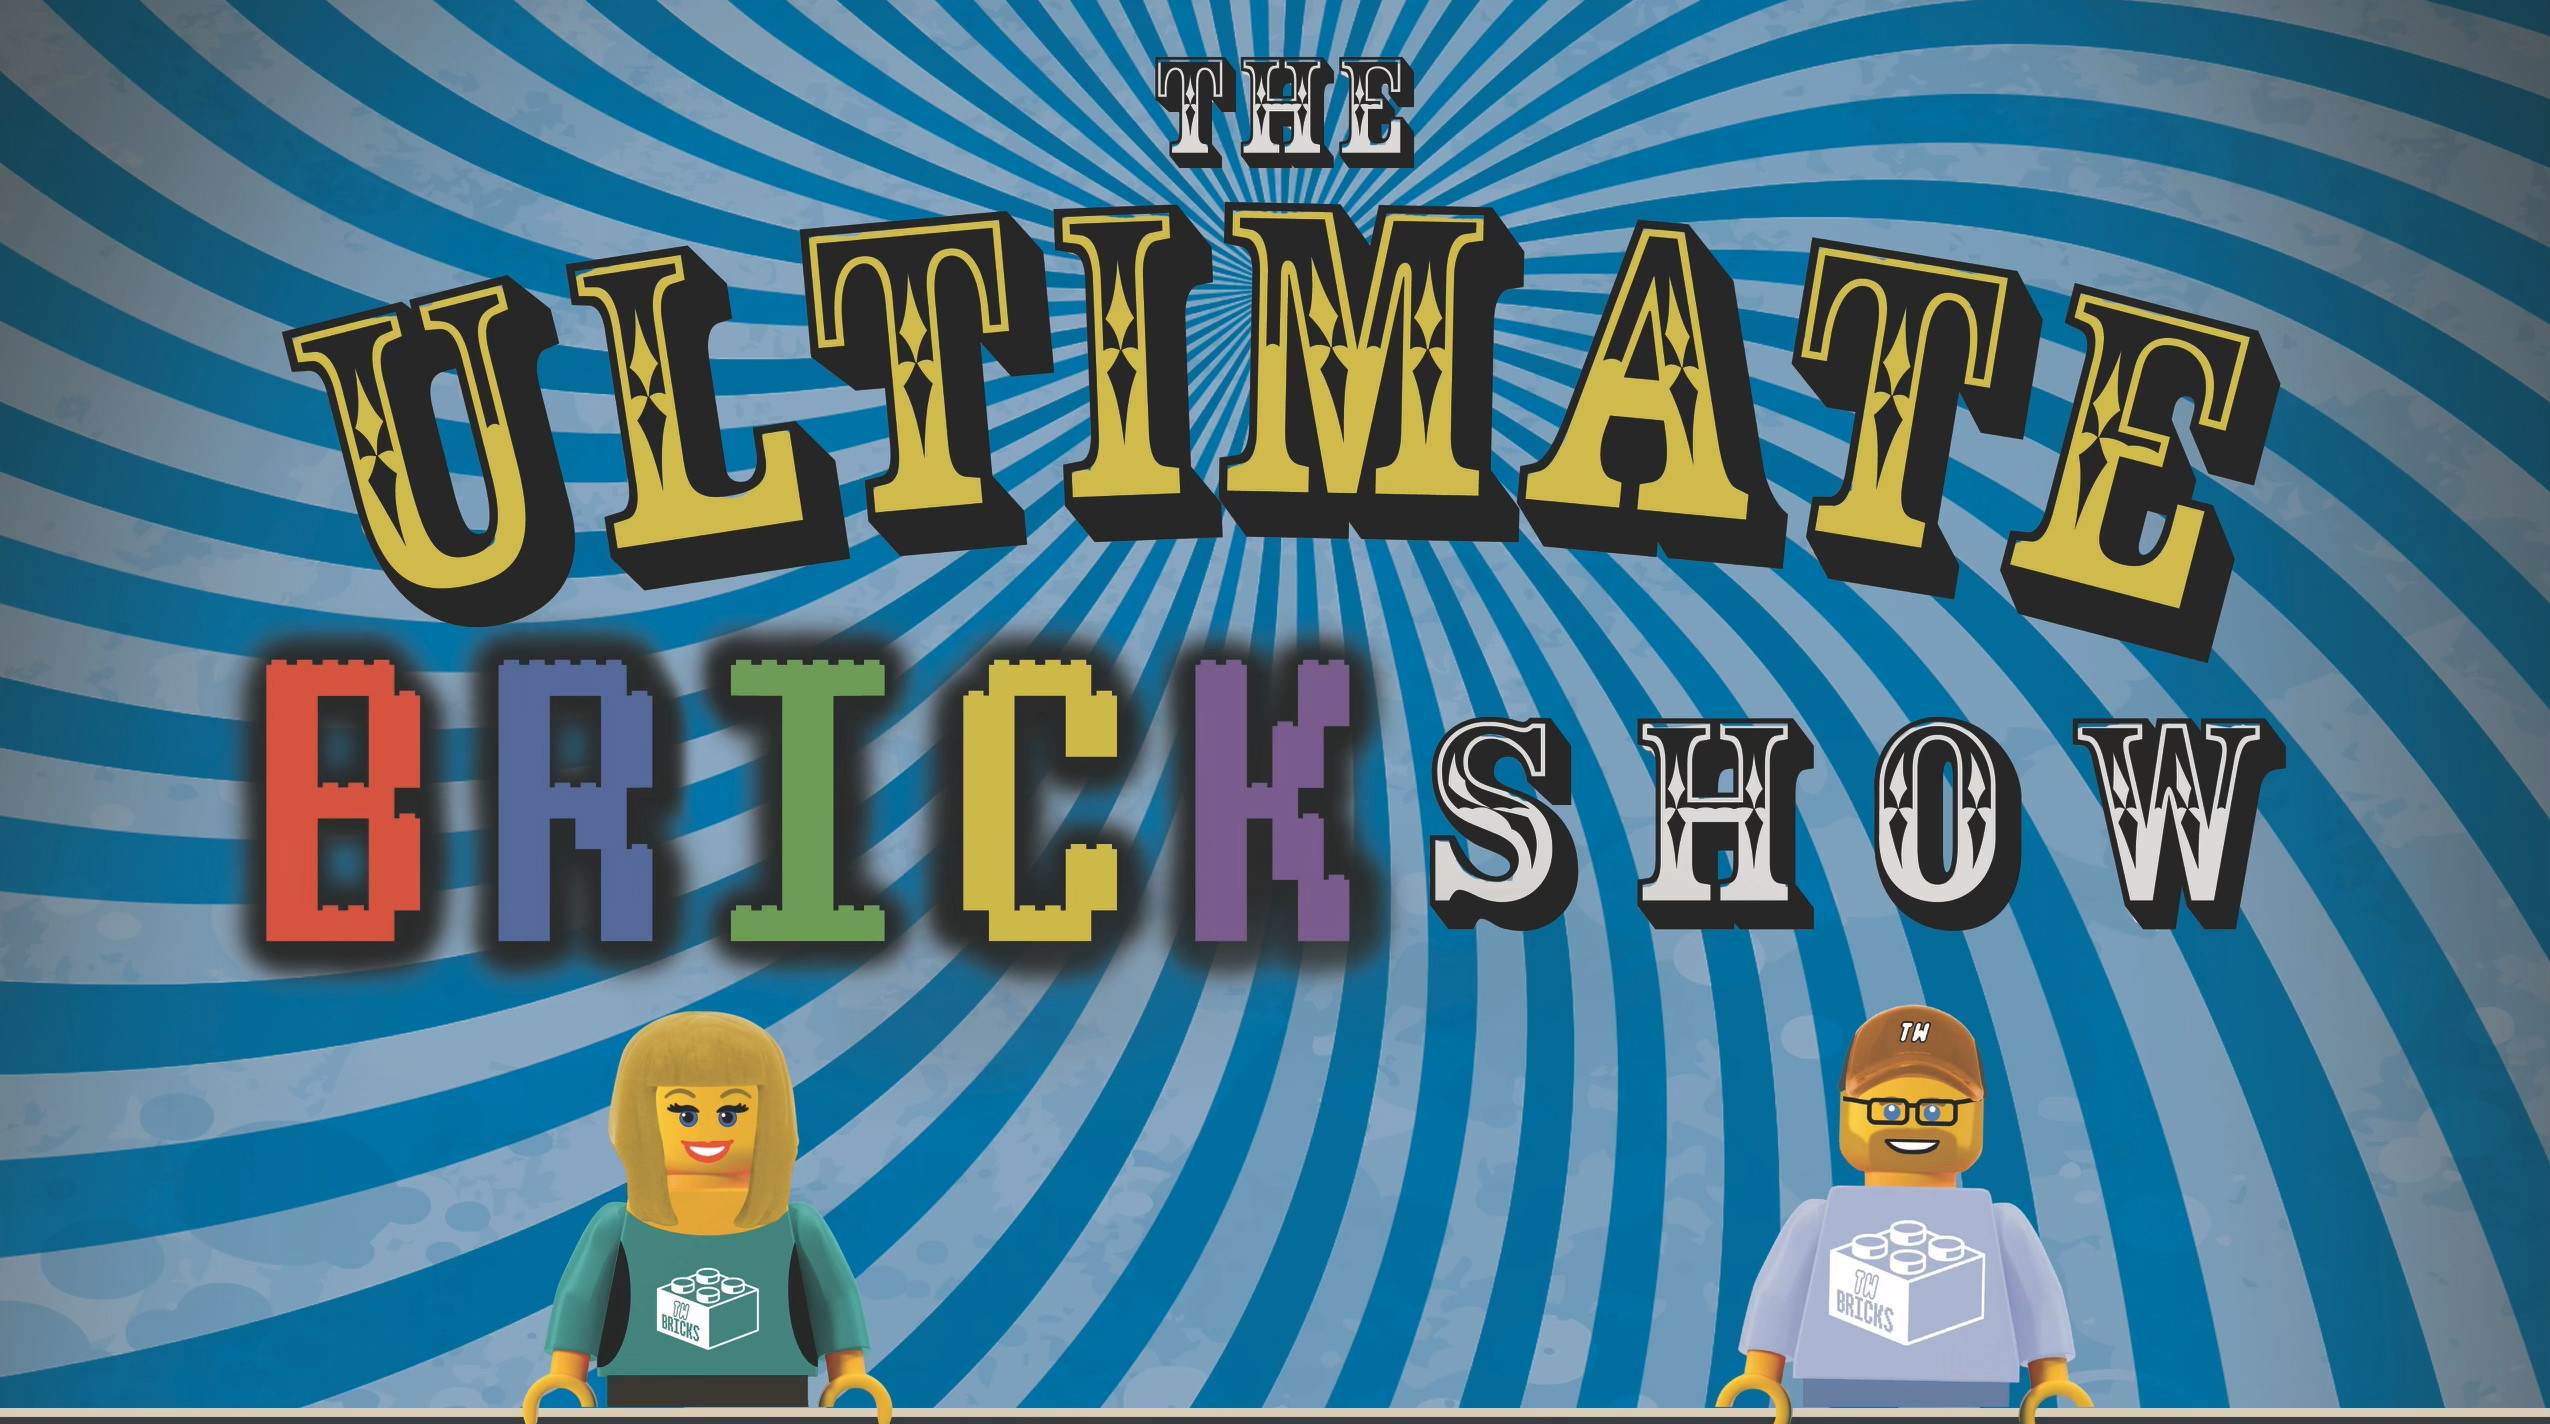 The Ultimate Brick Show_poster copy